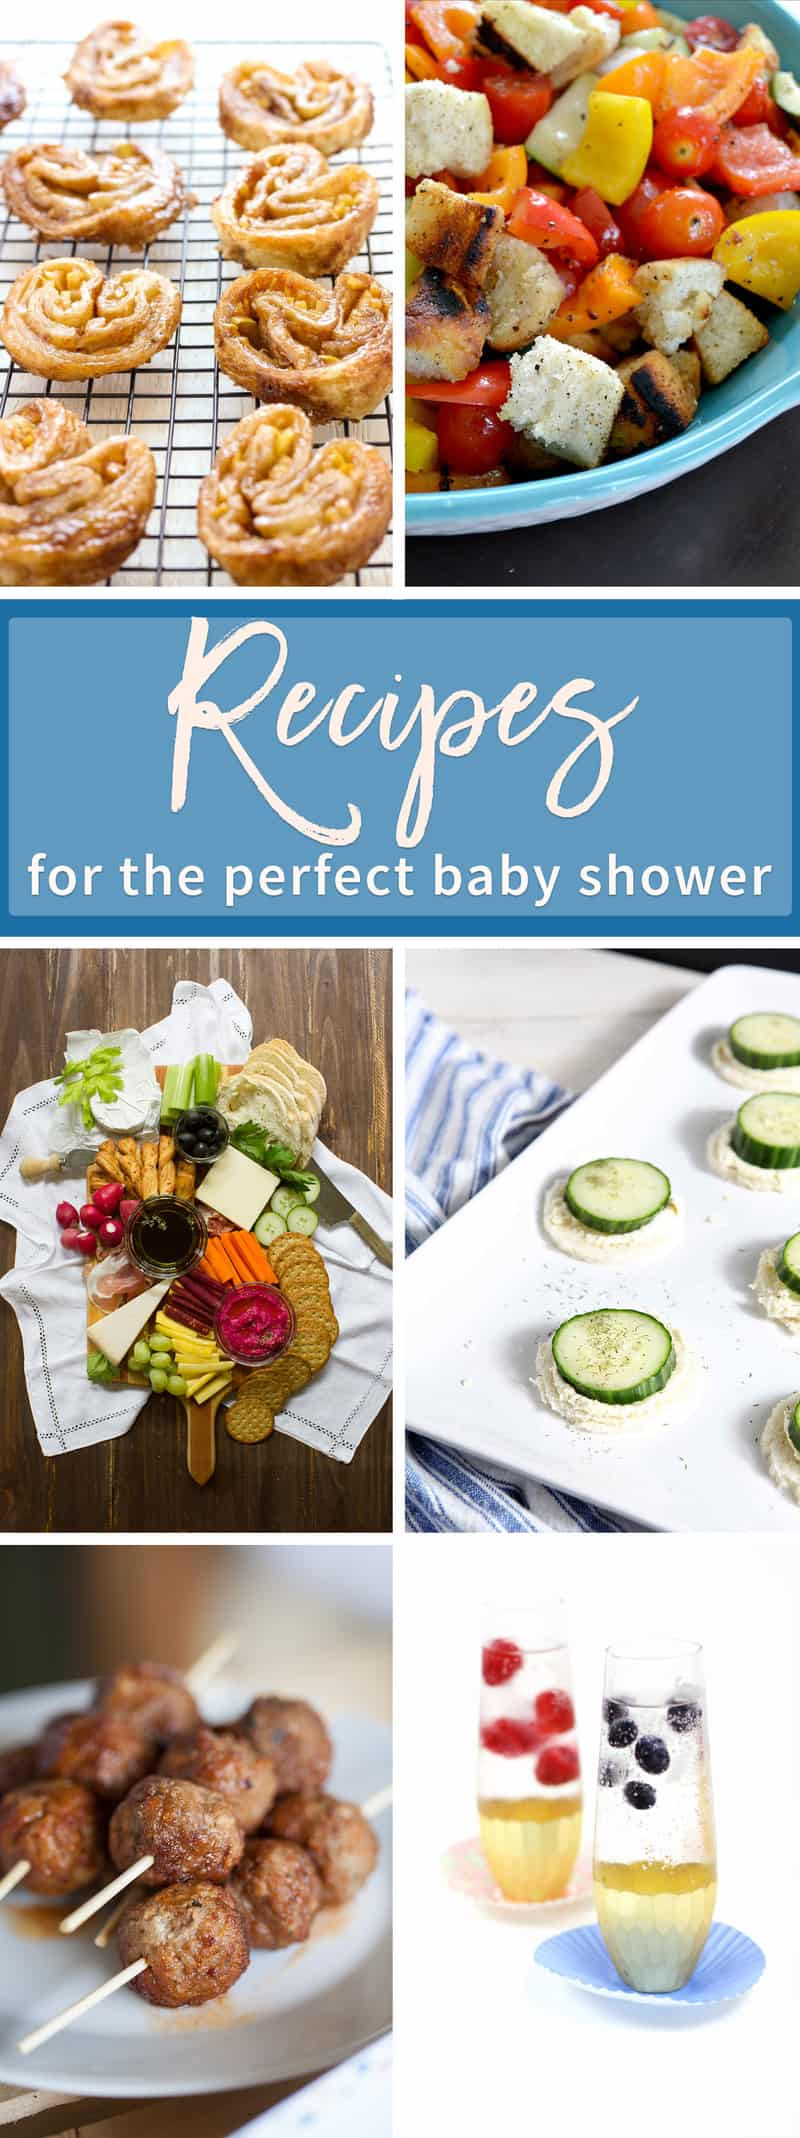 Recipes For Baby Showers
 Sparkling Balsamic Mocktails with Berry Ice Cubes Feast